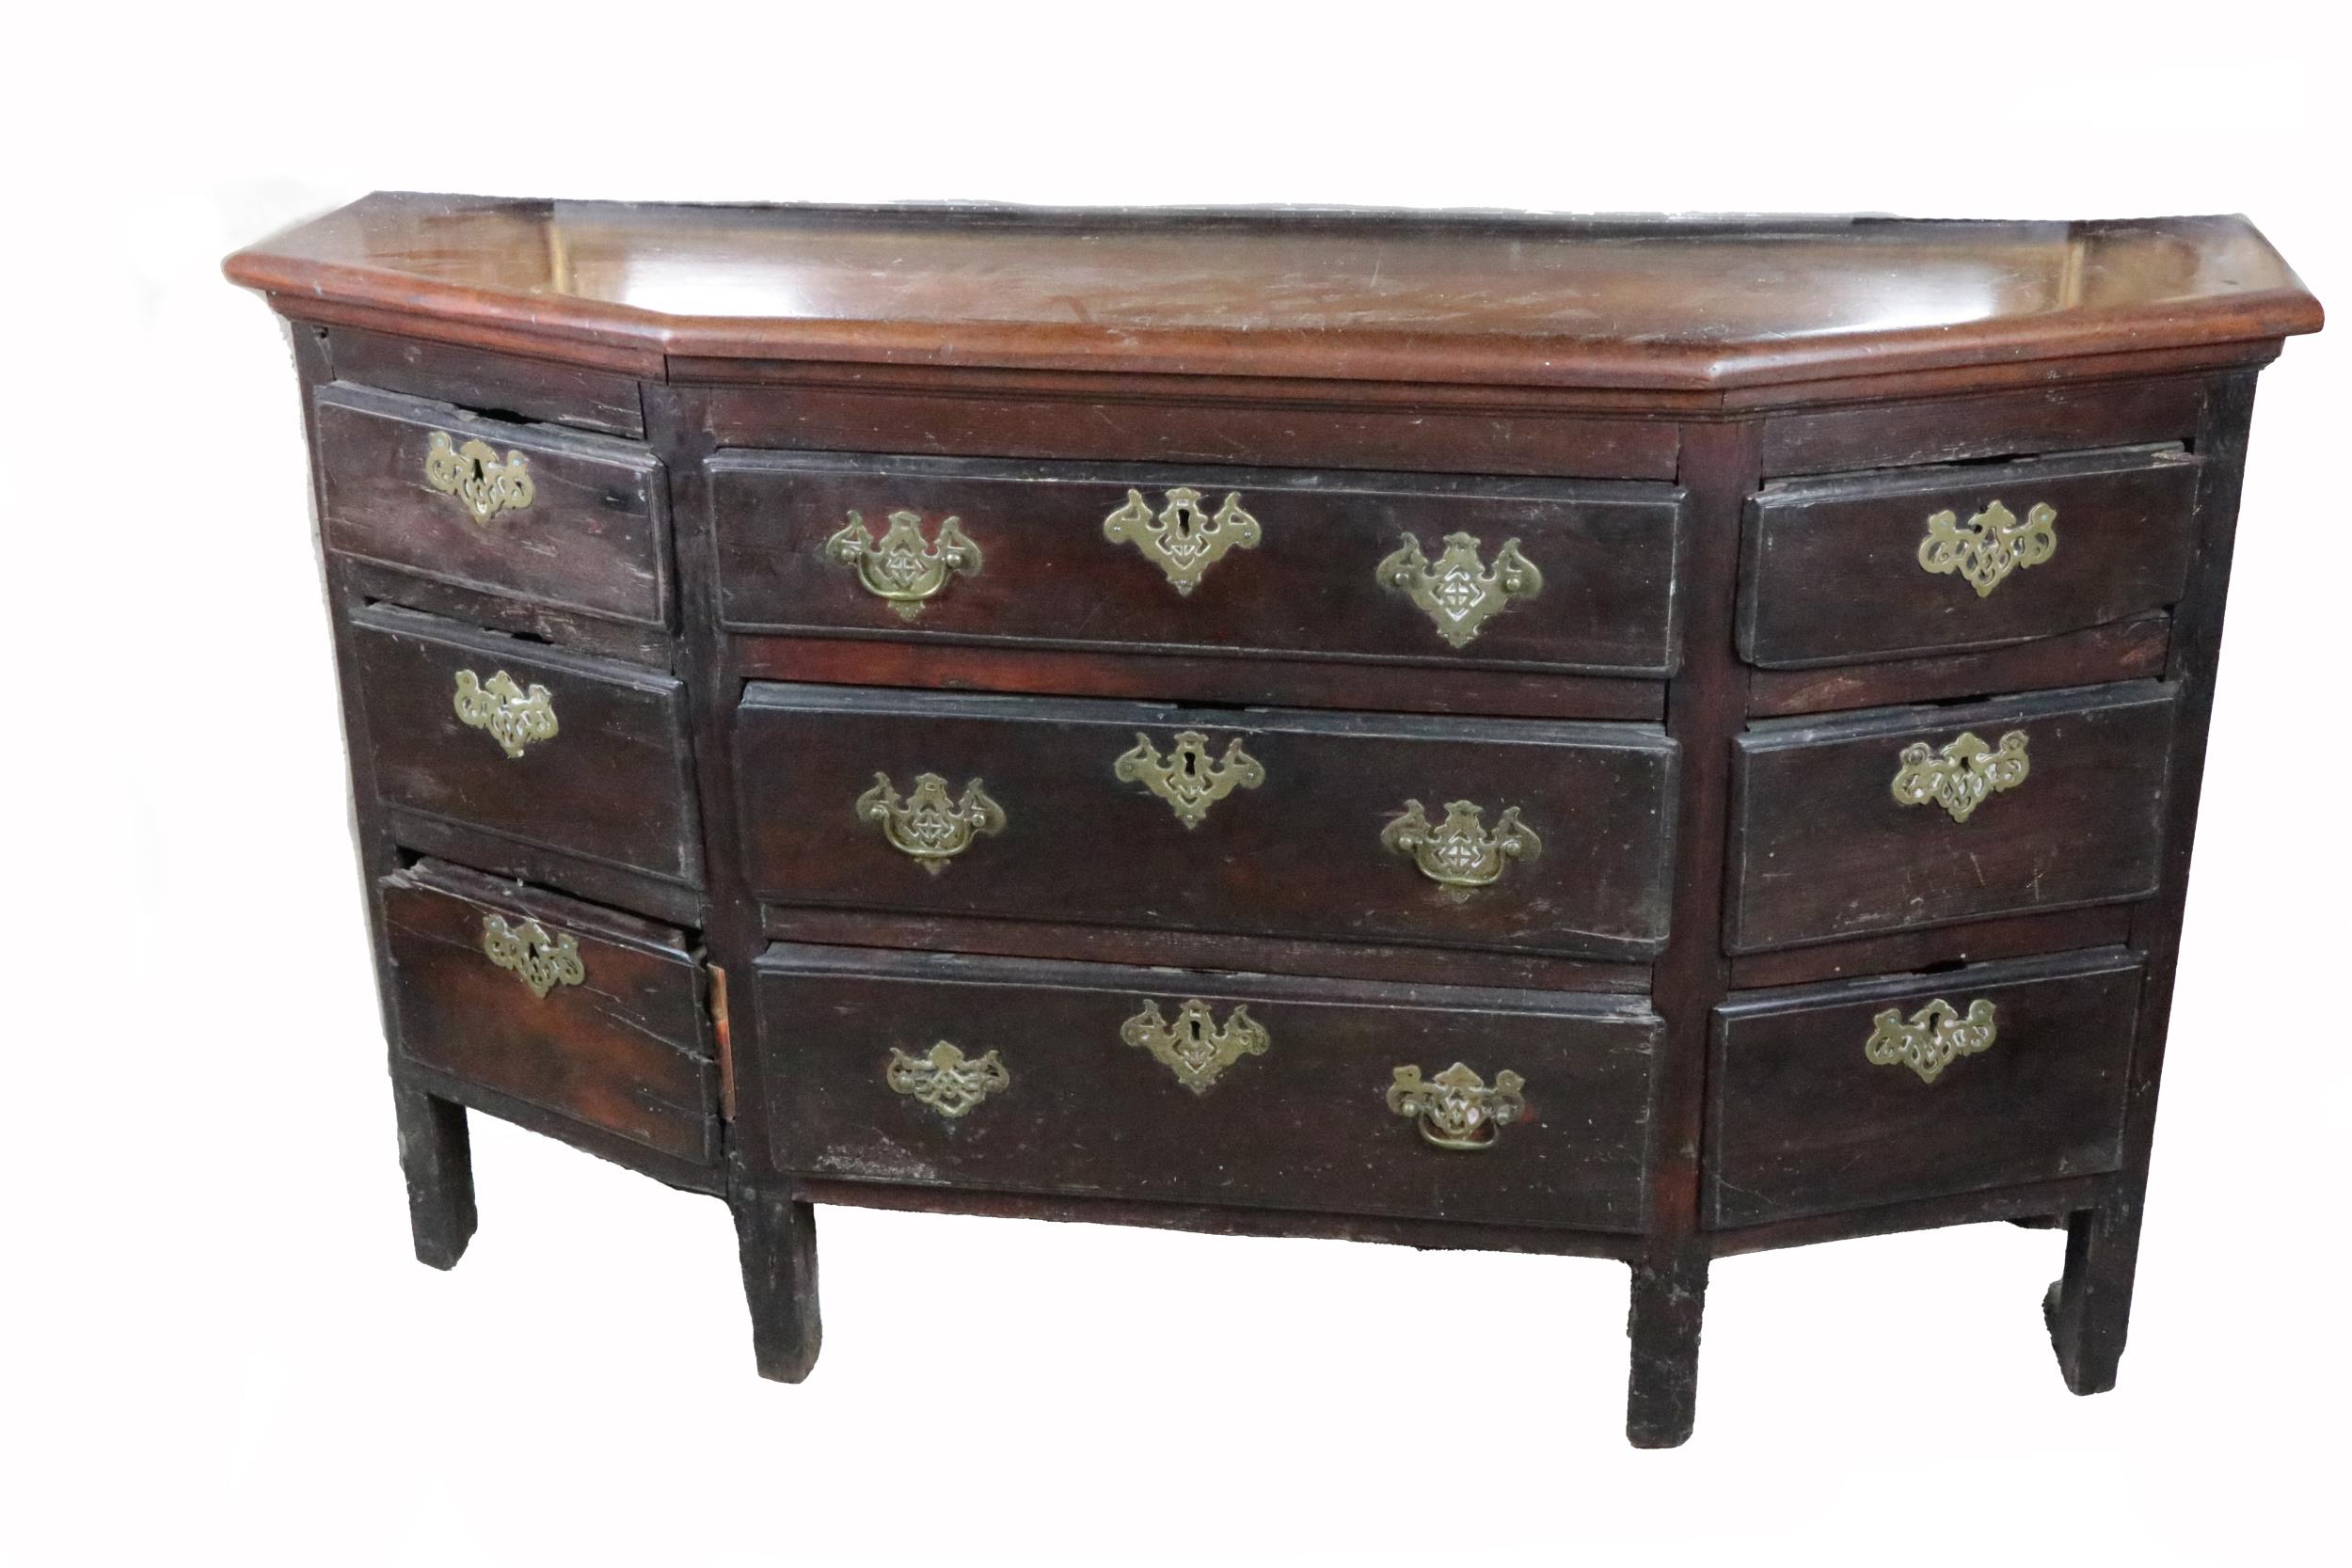 An unusual and early 19th Century Irish Provincial Chest, of angled form with three long central